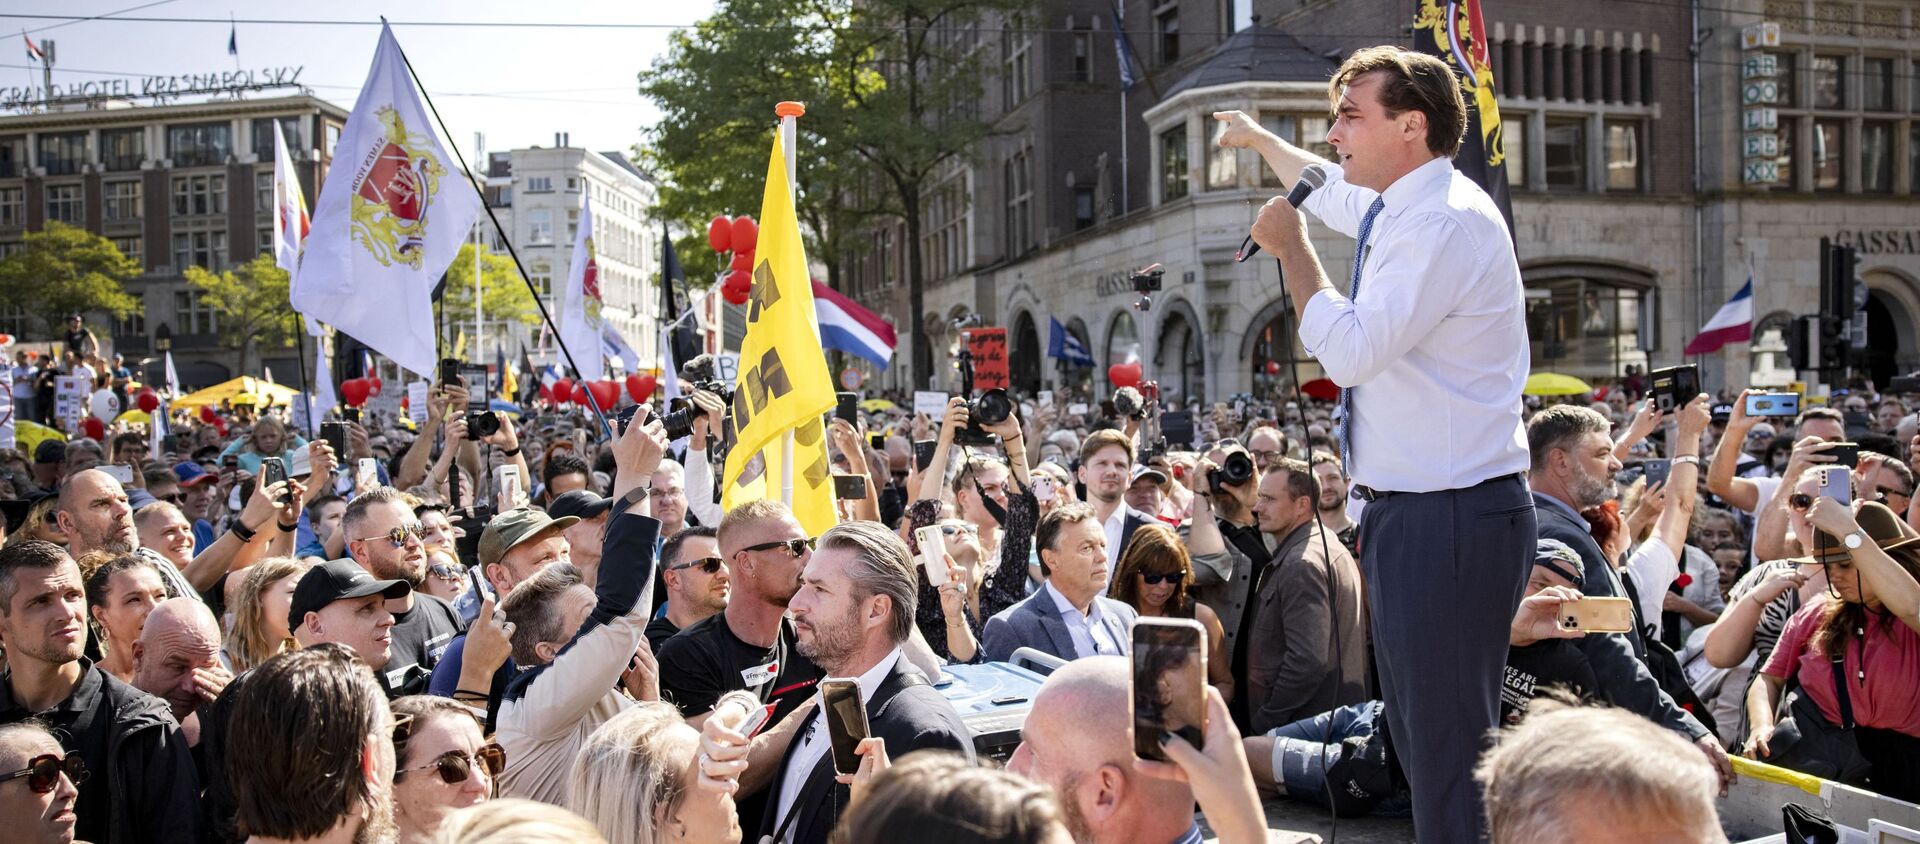 Leader of the Forum for Democracy (FVD) Dutch party Thierry Baudet addresses protesters at Dam Square in Amsterdam, The Netherlands, during the Together for the Netherlands demonstration, protest against the freedom-restricting corona measures and medical apartheid, on September 5, 2021.  - Sputnik International, 1920